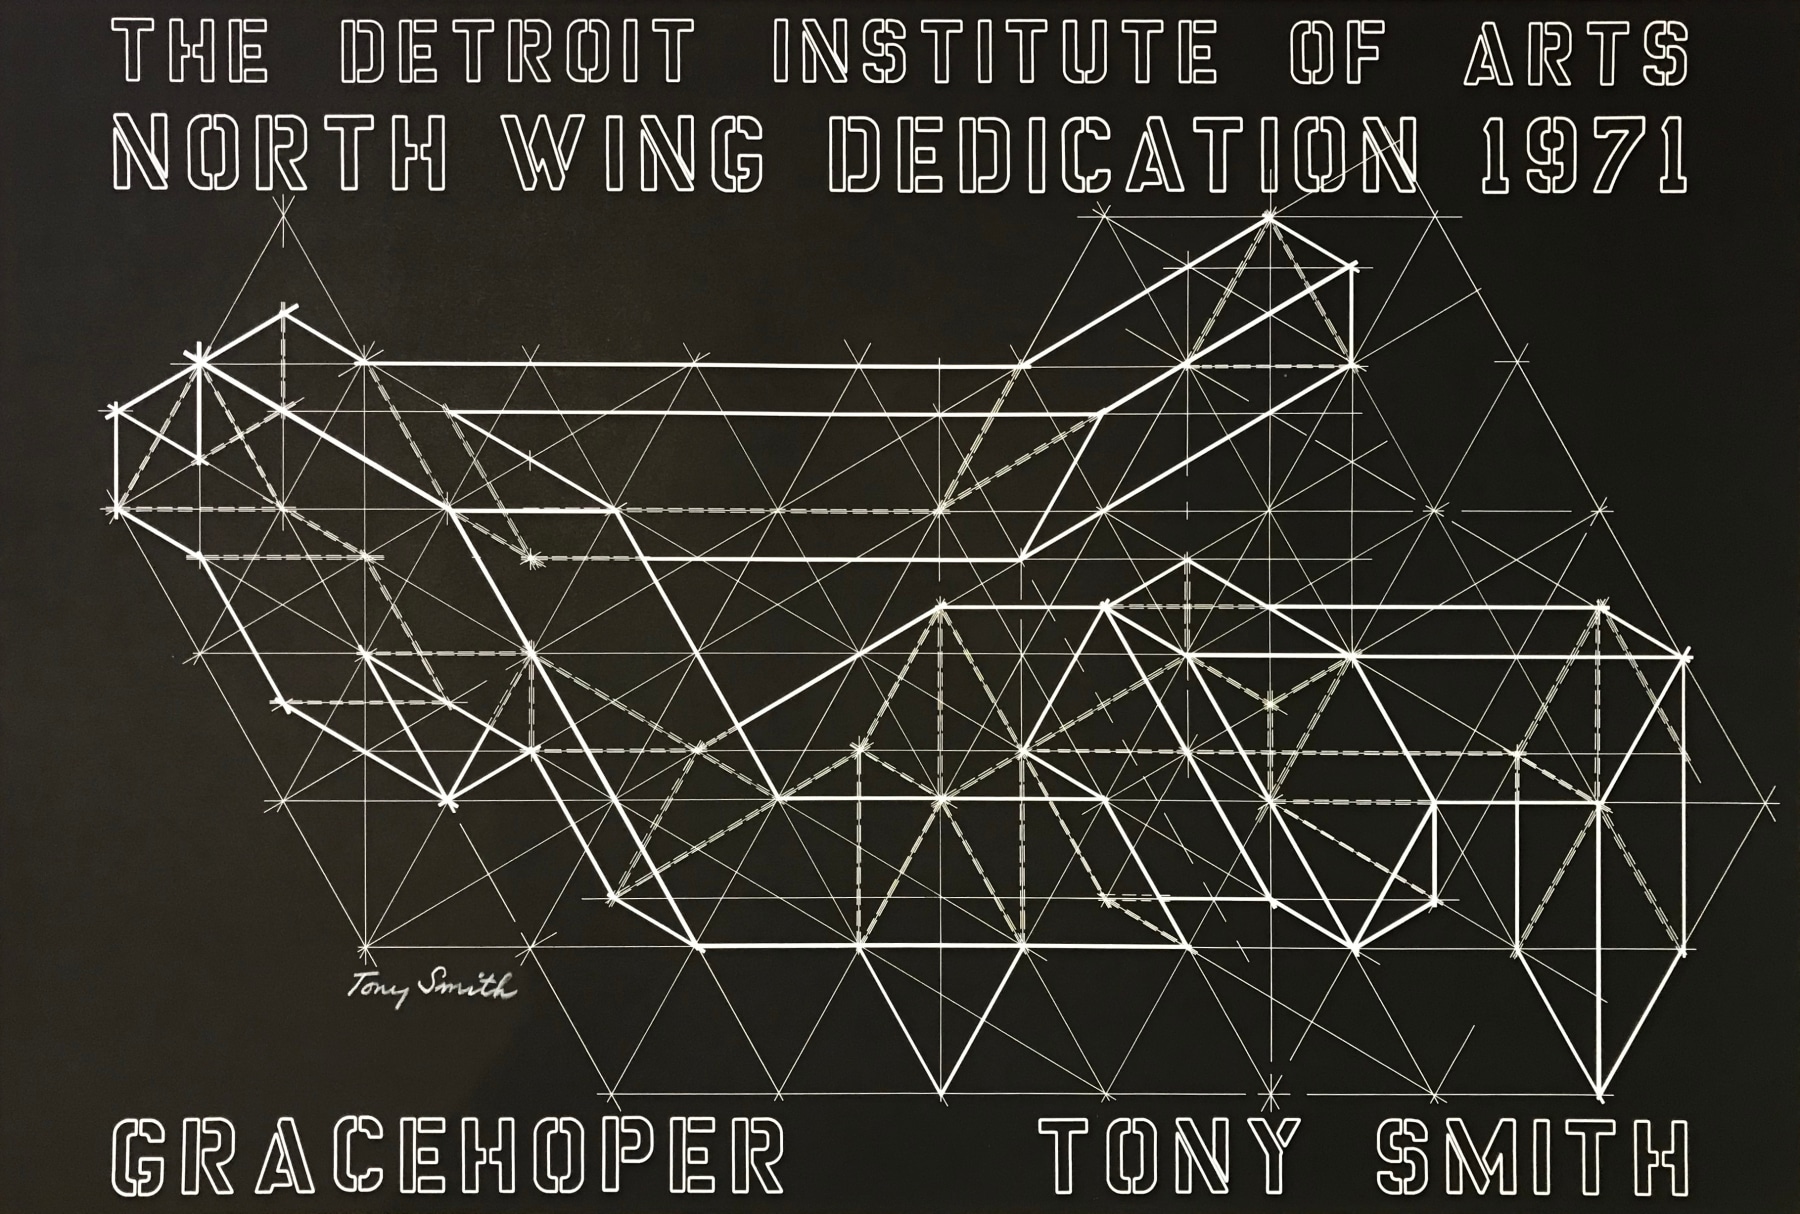 Poster (1972): Inauguration of&amp;nbsp;Gracehoper&amp;nbsp;(1962)
Designed by Tony Smith
Detroit Institute of Arts, Michigan